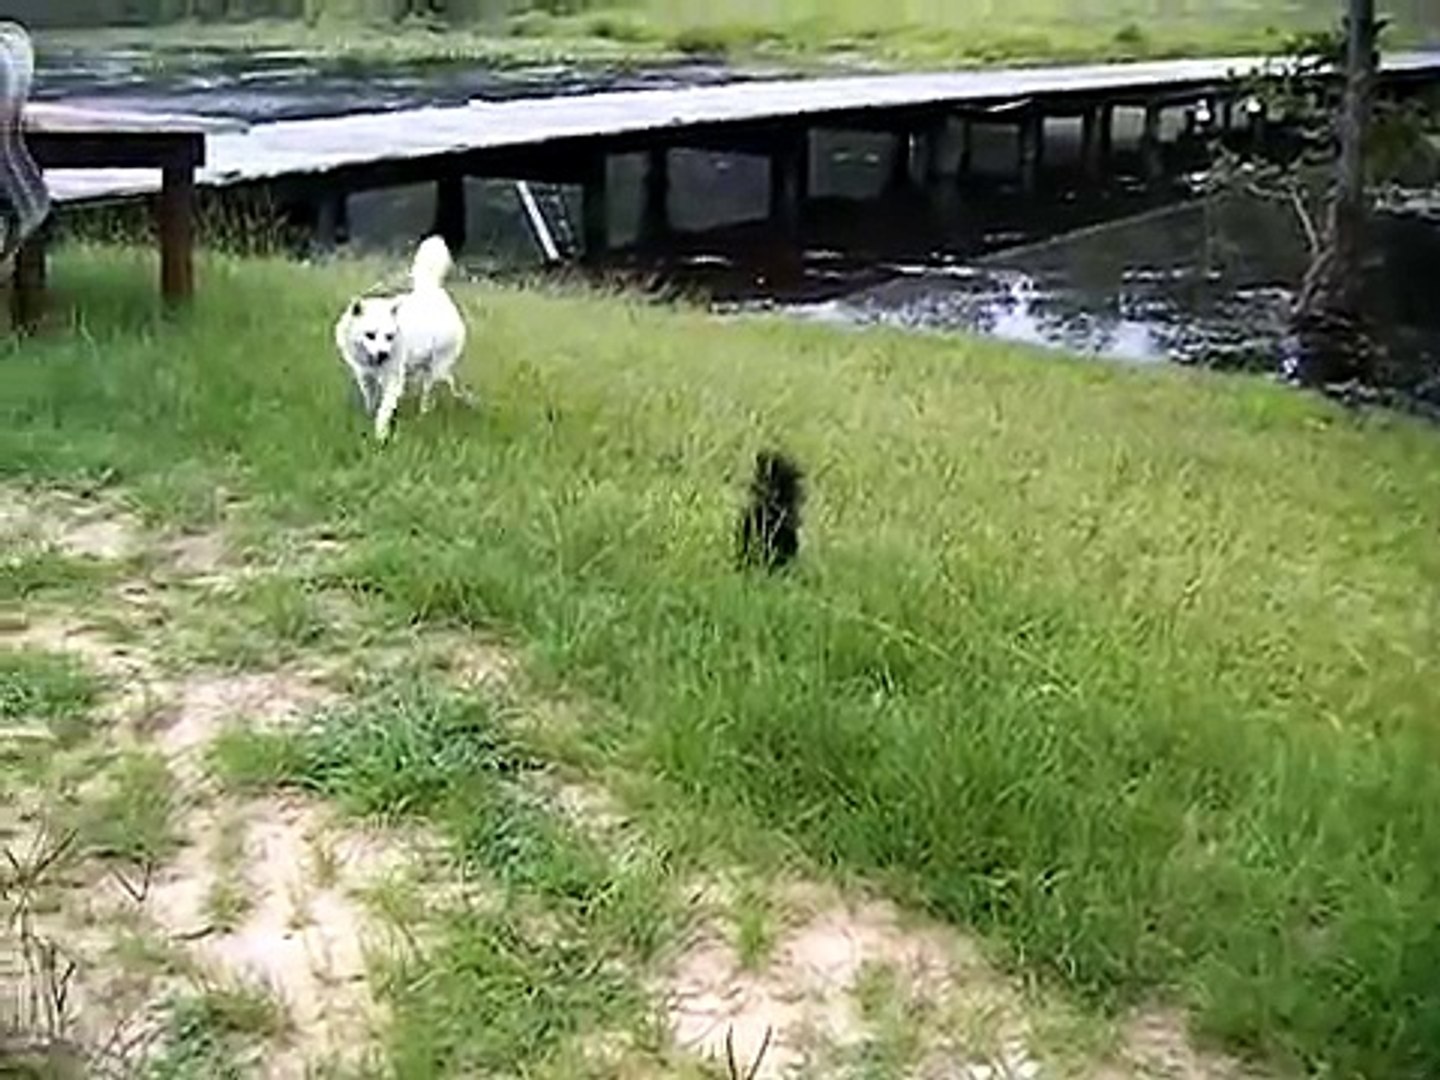 Dog Meets Skunk - The Rest of the Story